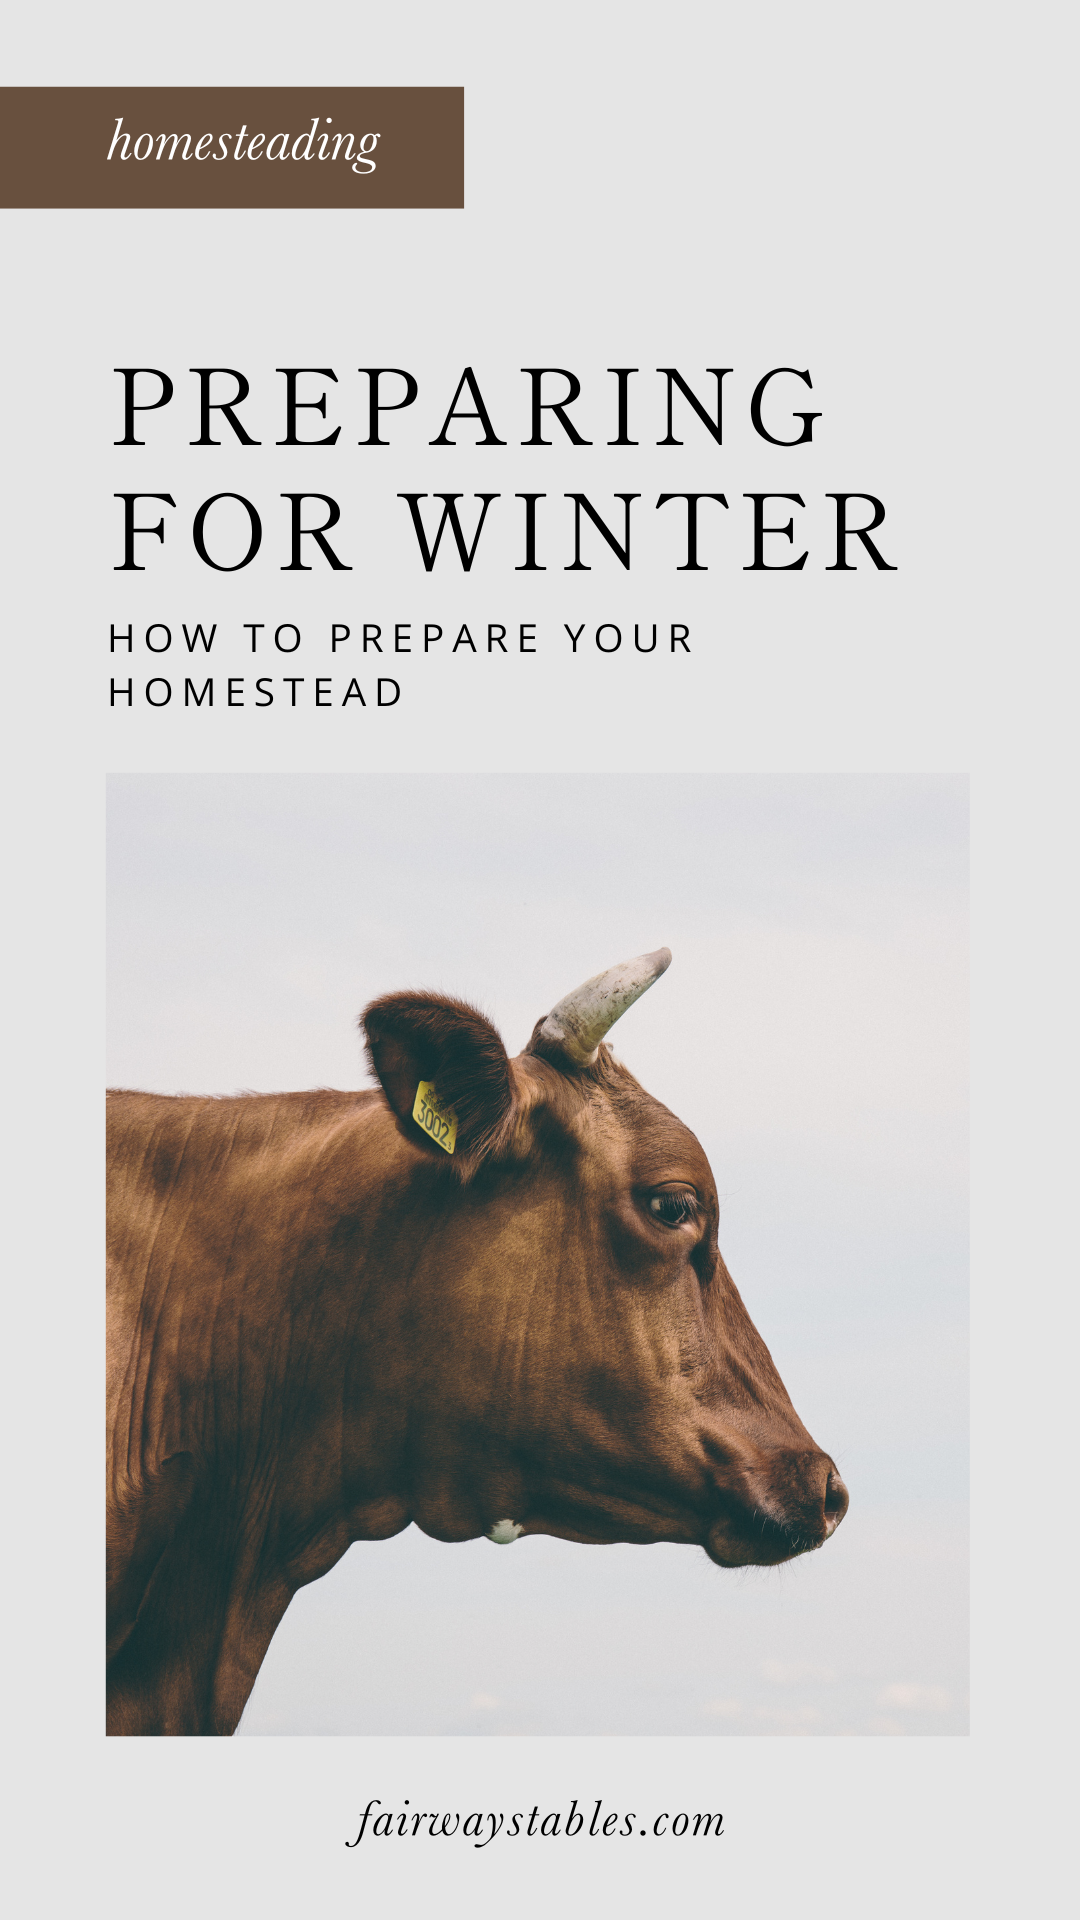 https://fairwaystables.com/wp-content/uploads/2022/11/Preparing-Your-Homestead-For-Winter.png